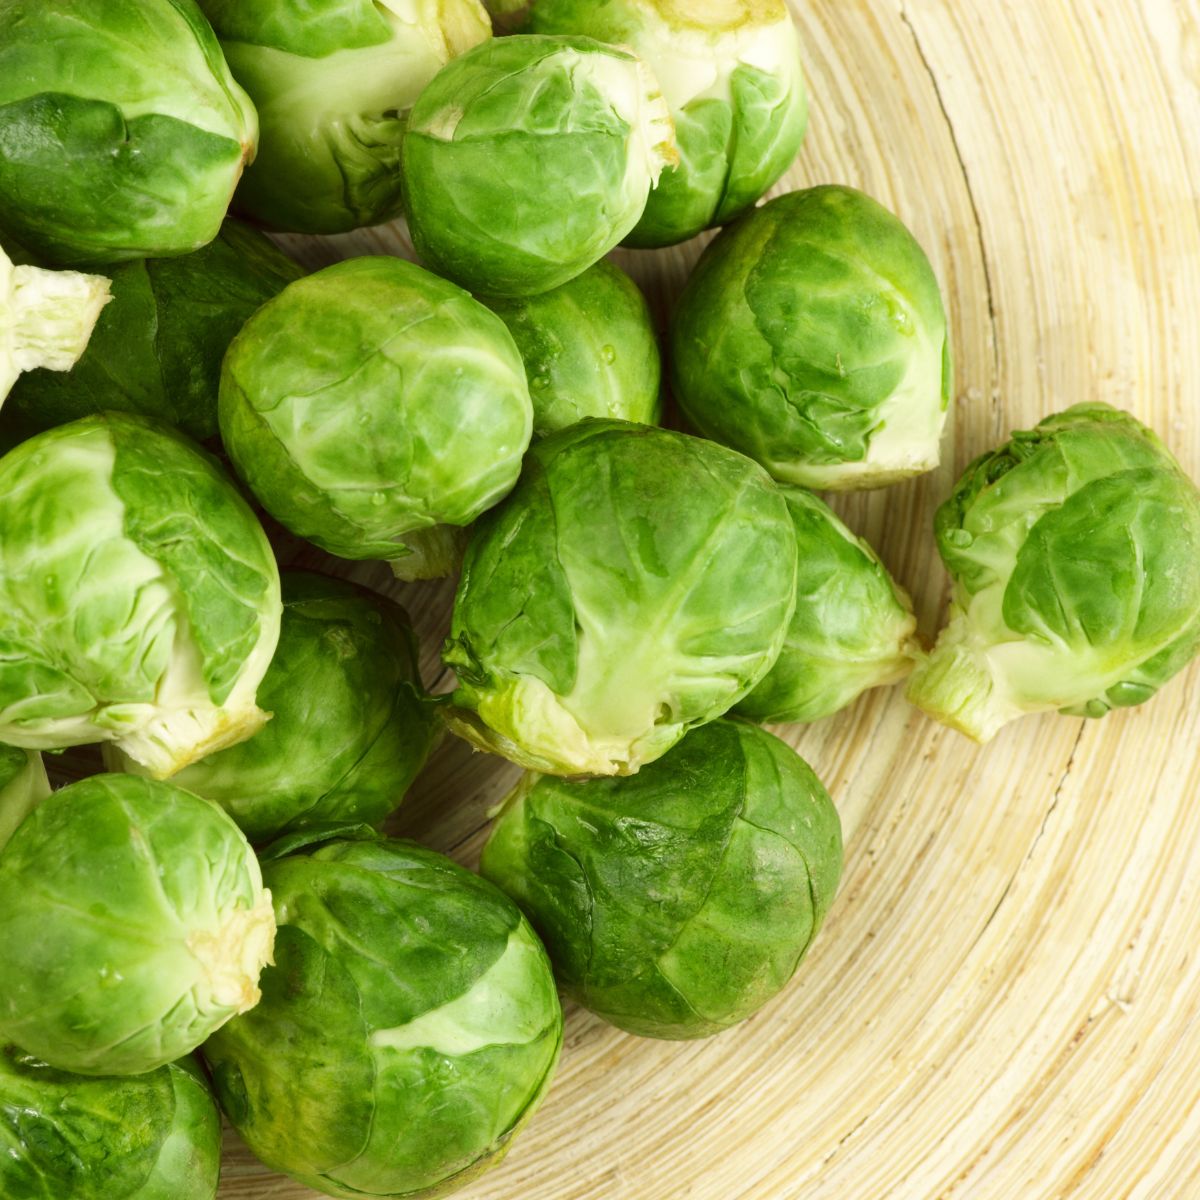 A close-up image of fresh brussels sprouts displayed on a wooden surface for a recipe index.